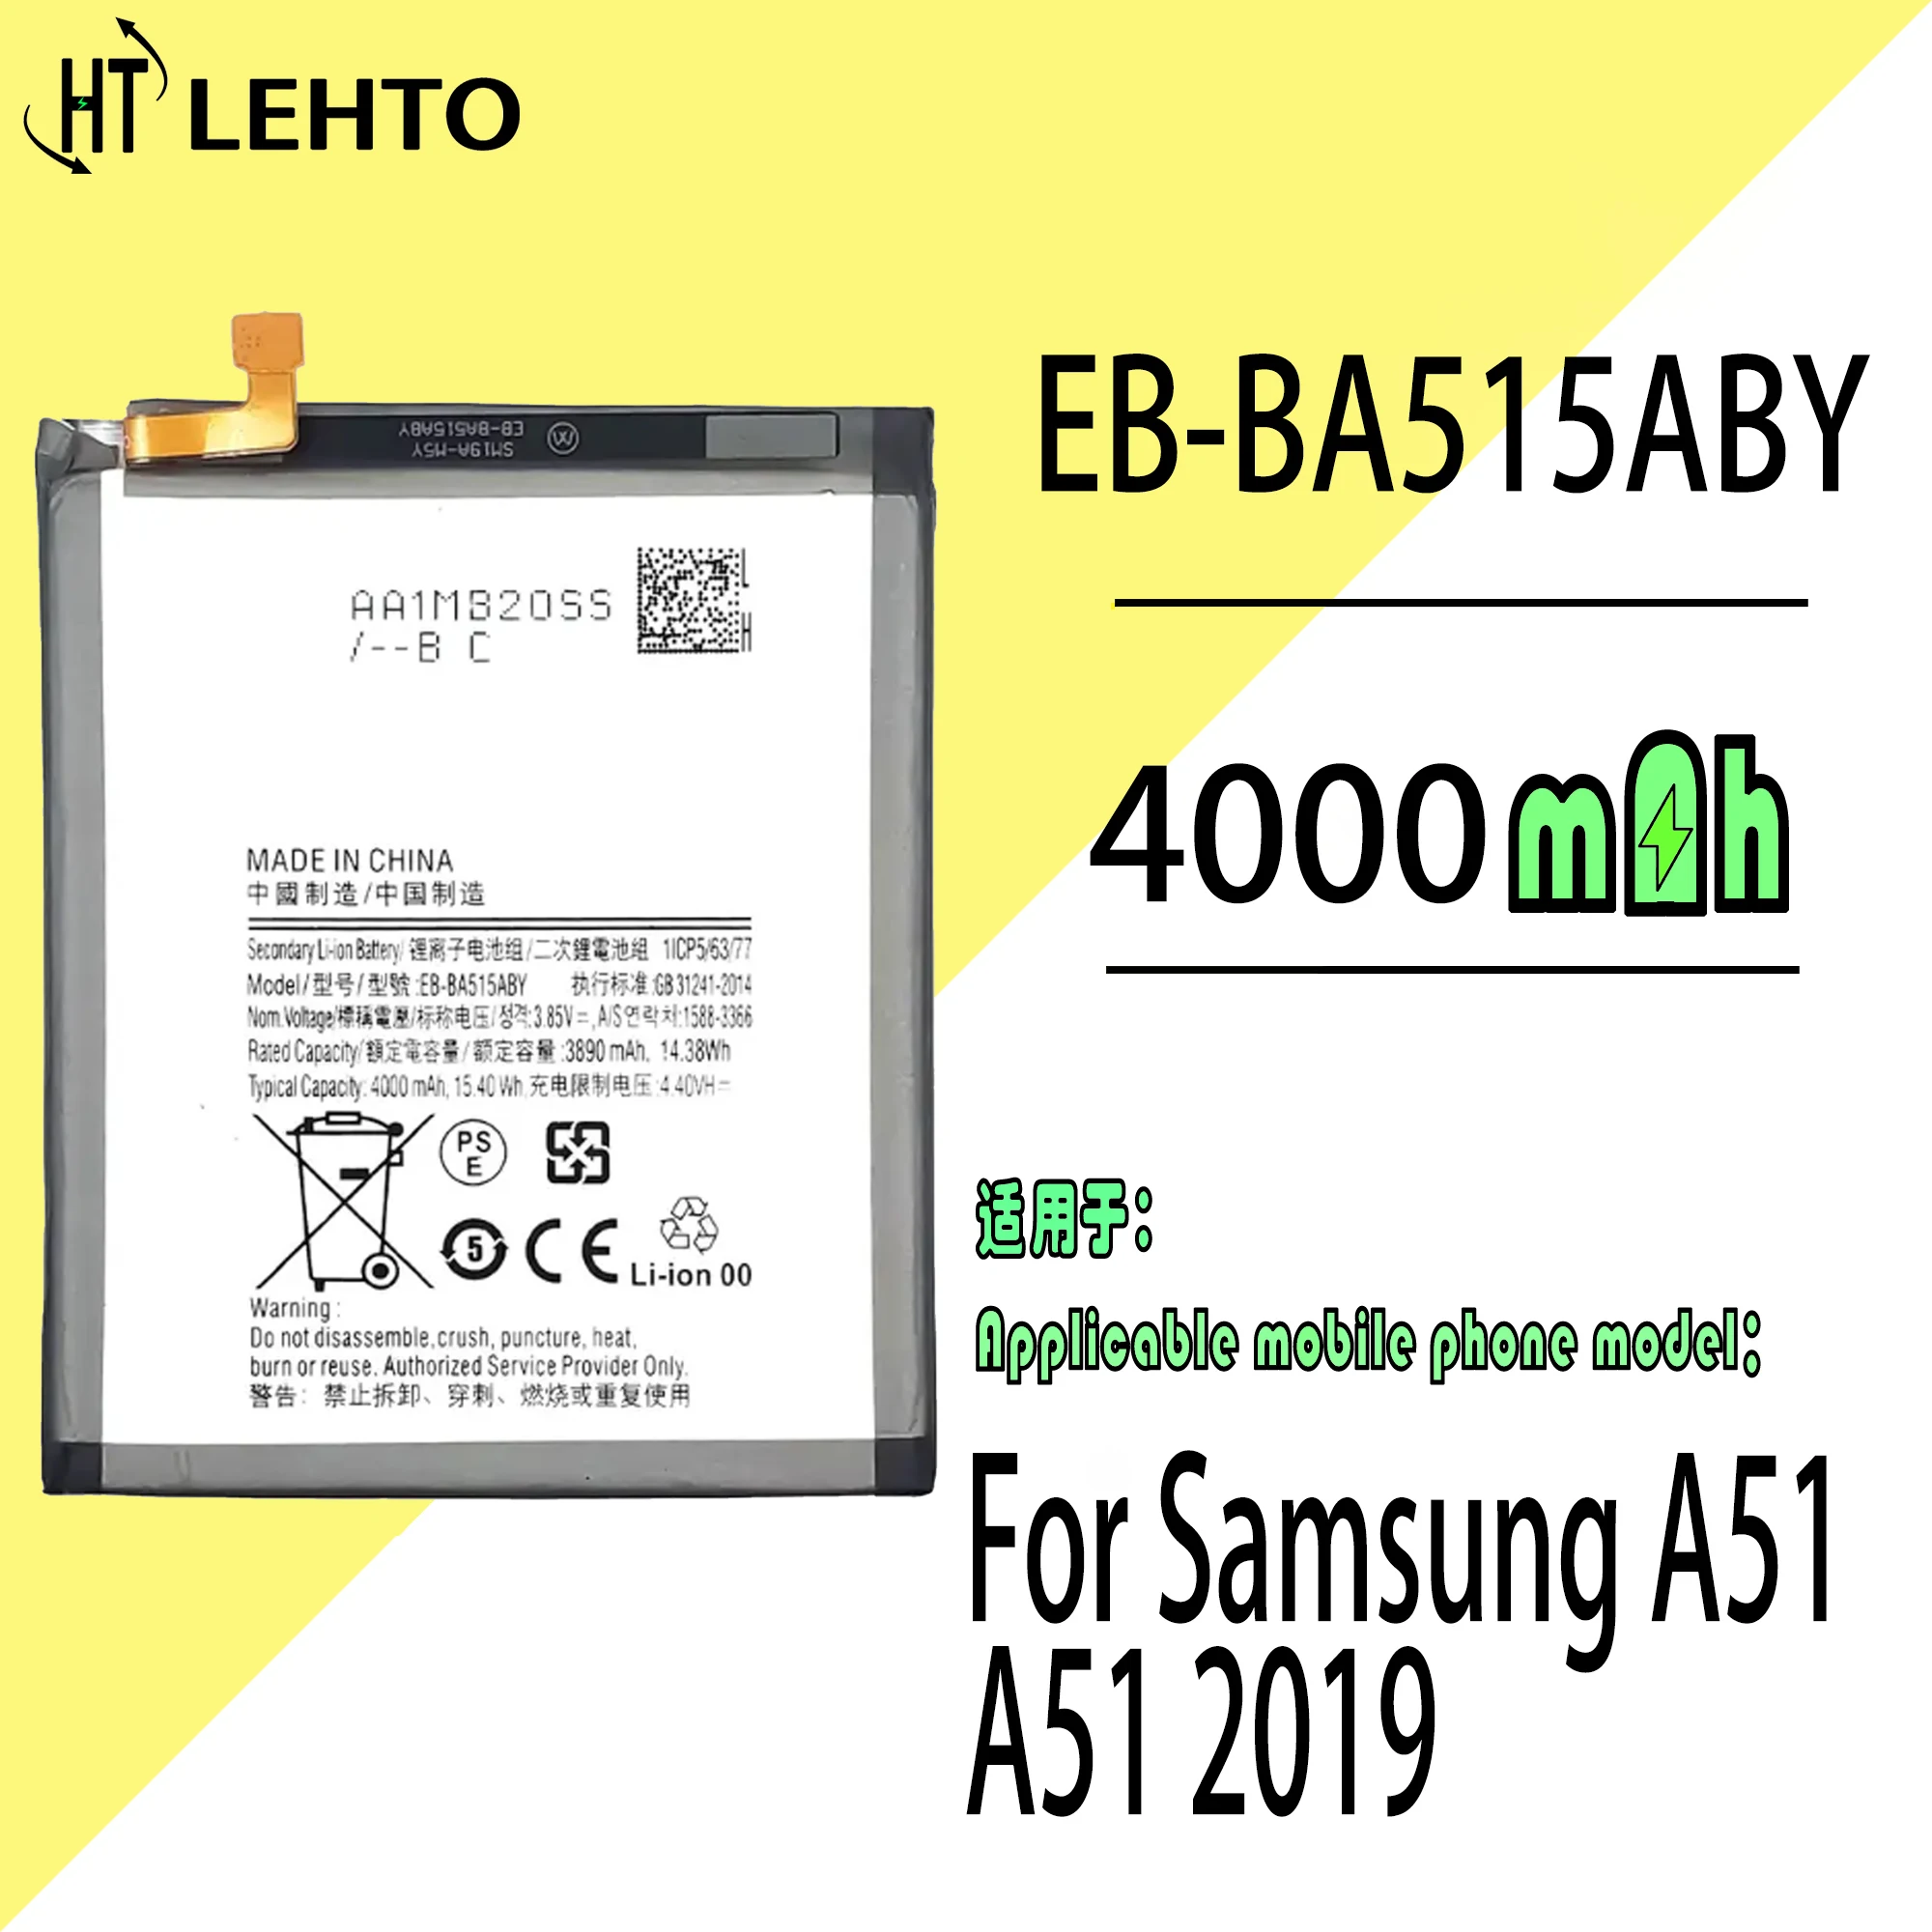 

100% OrIginal EB-BA515ABY 4000mAh Replacement Battery For Samsung Galaxy A51 SM-A515 SM-A515F/DSM Mobile phone